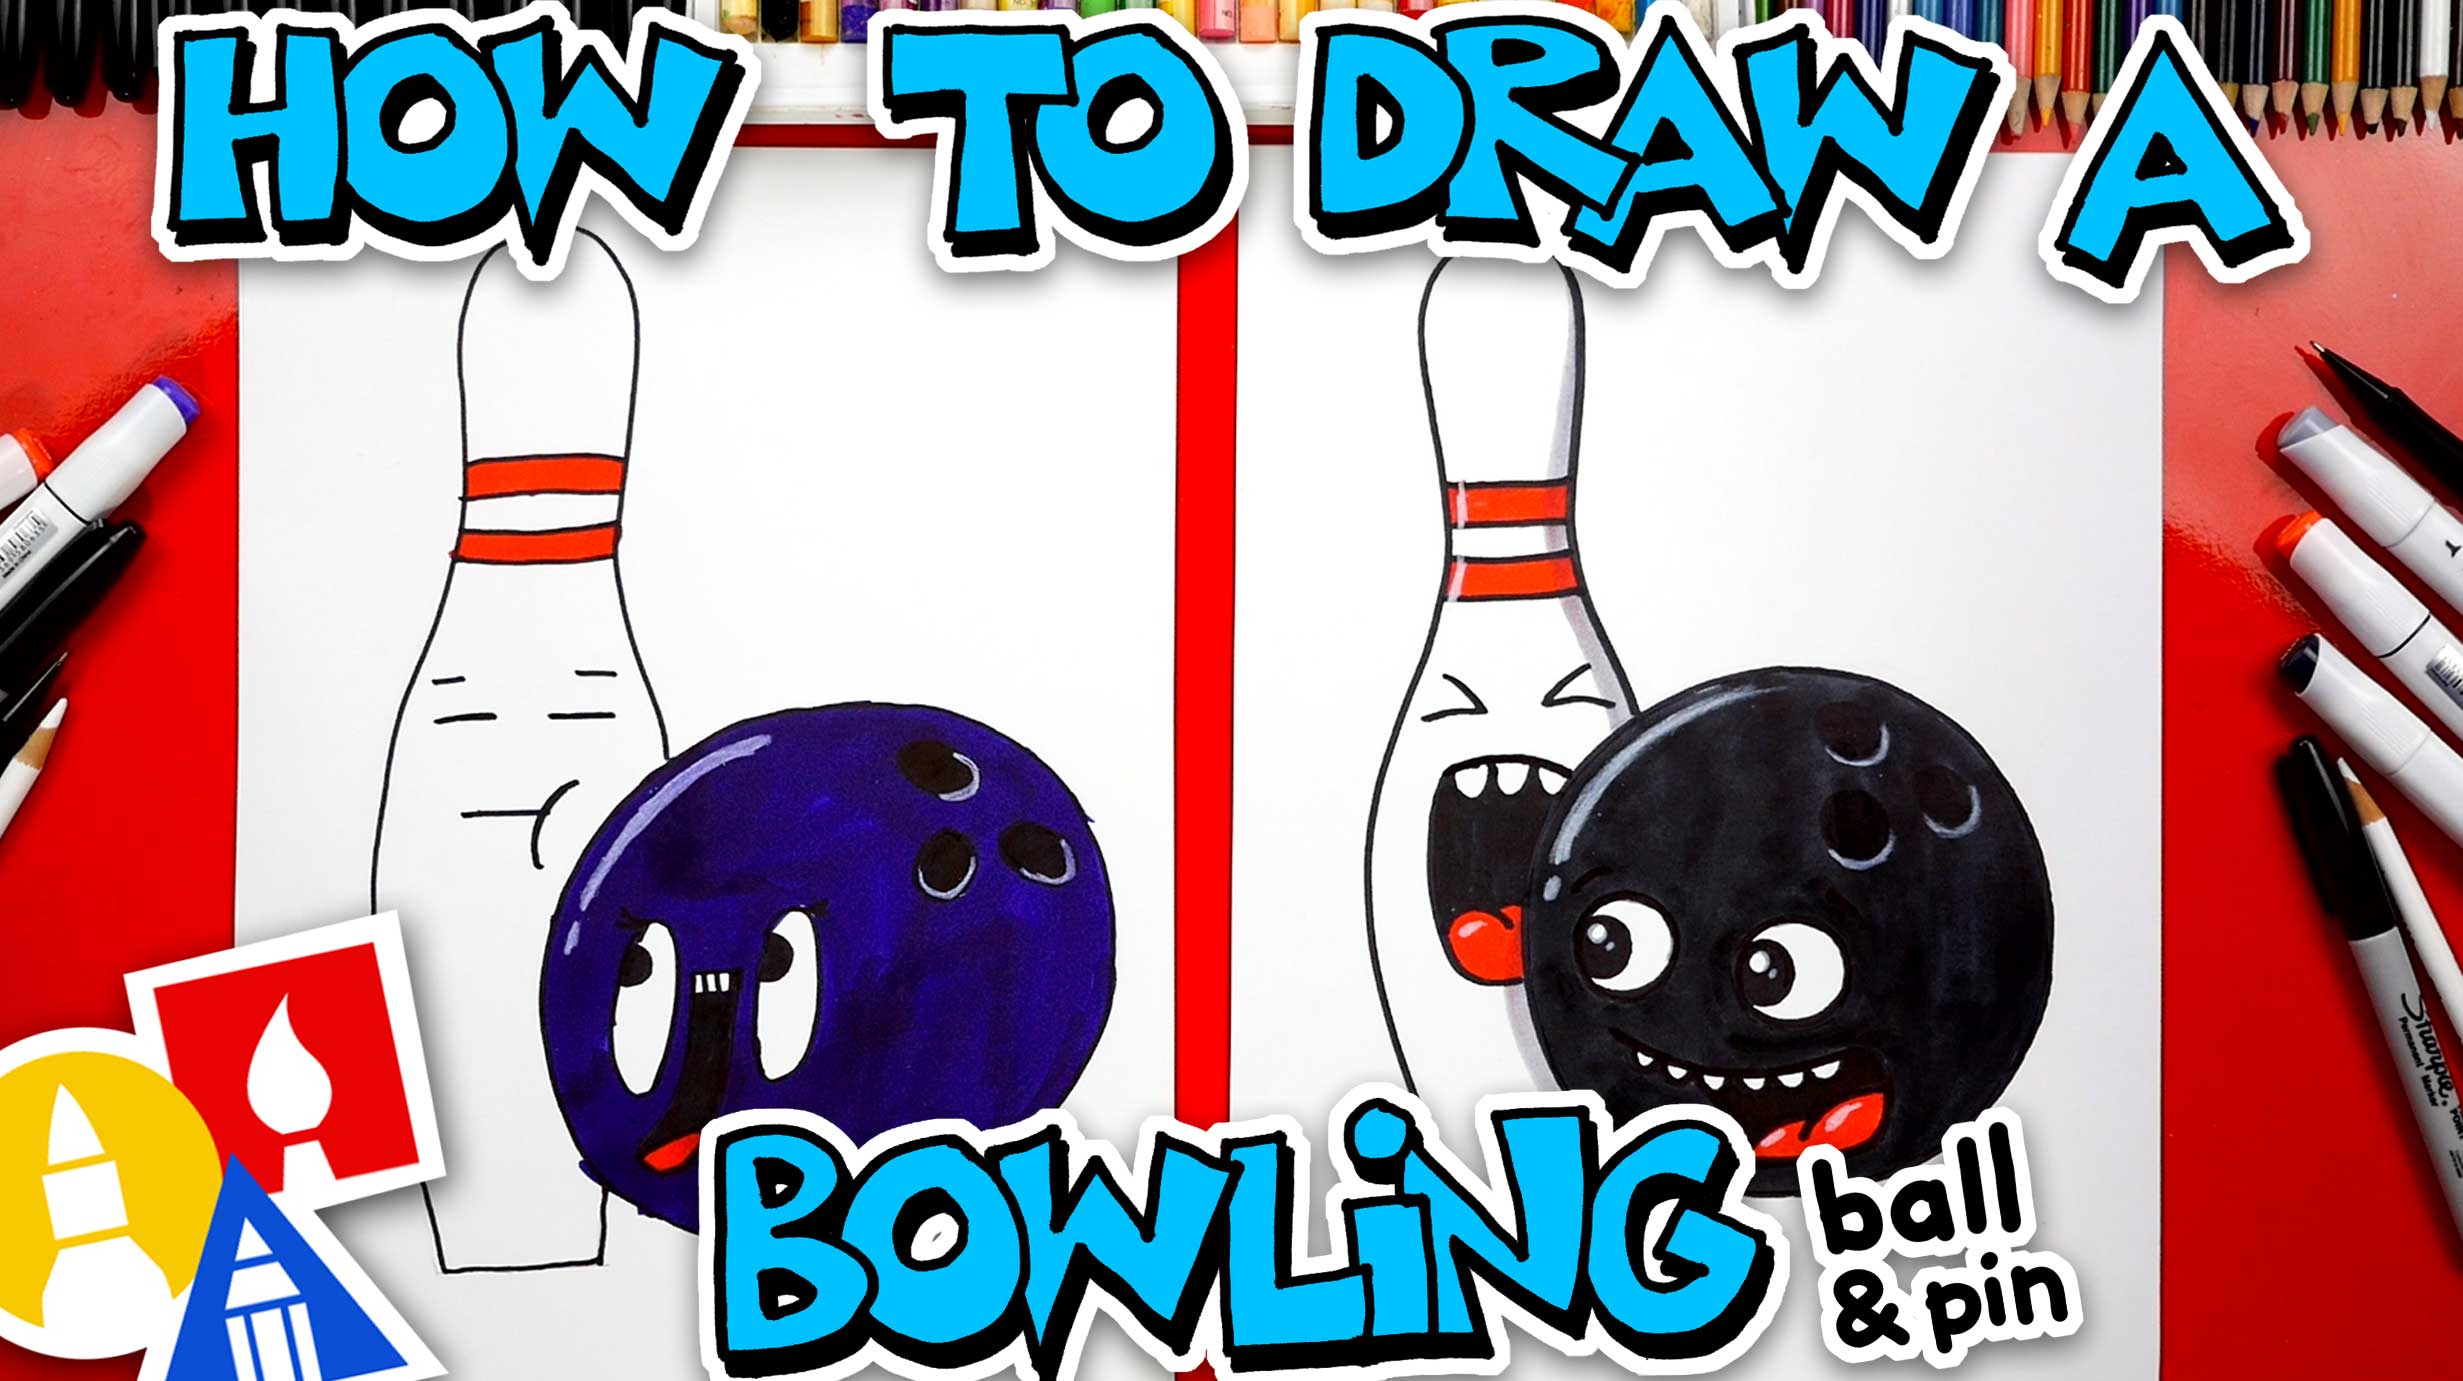 How To Draw A Funny Bowling Ball And Pin Art For Kids Hub